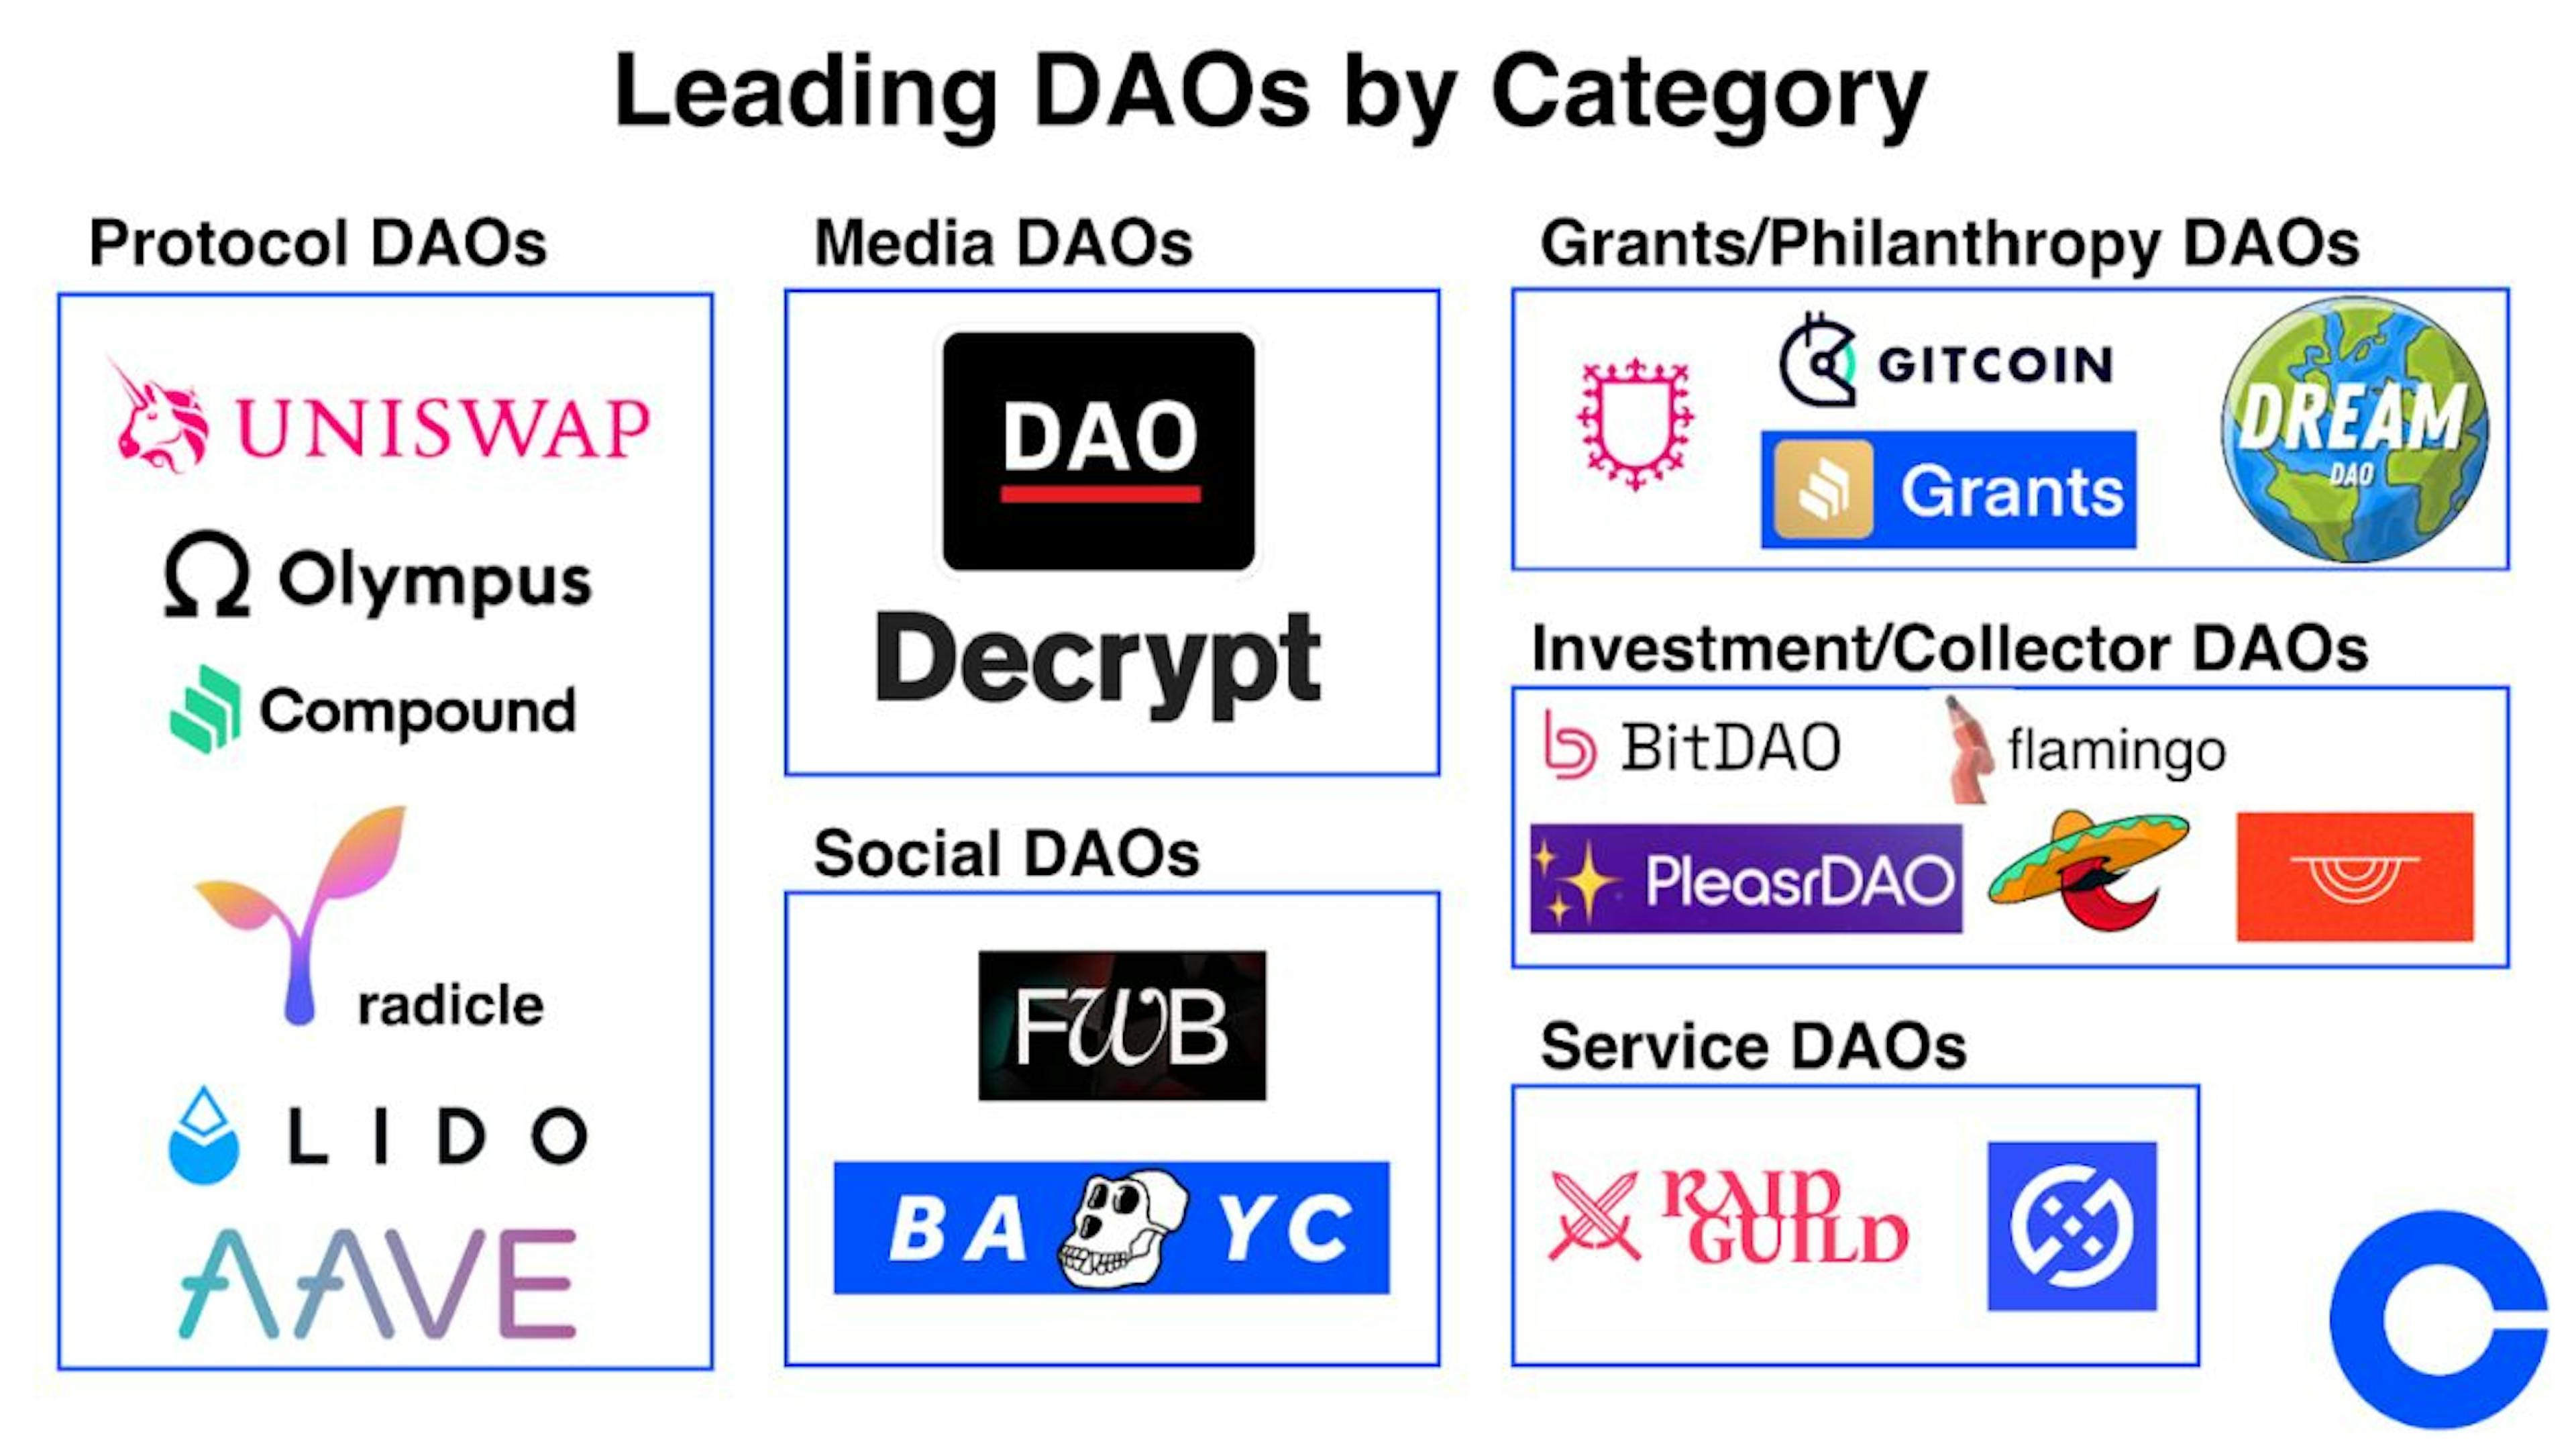 Leading DAOs by Category